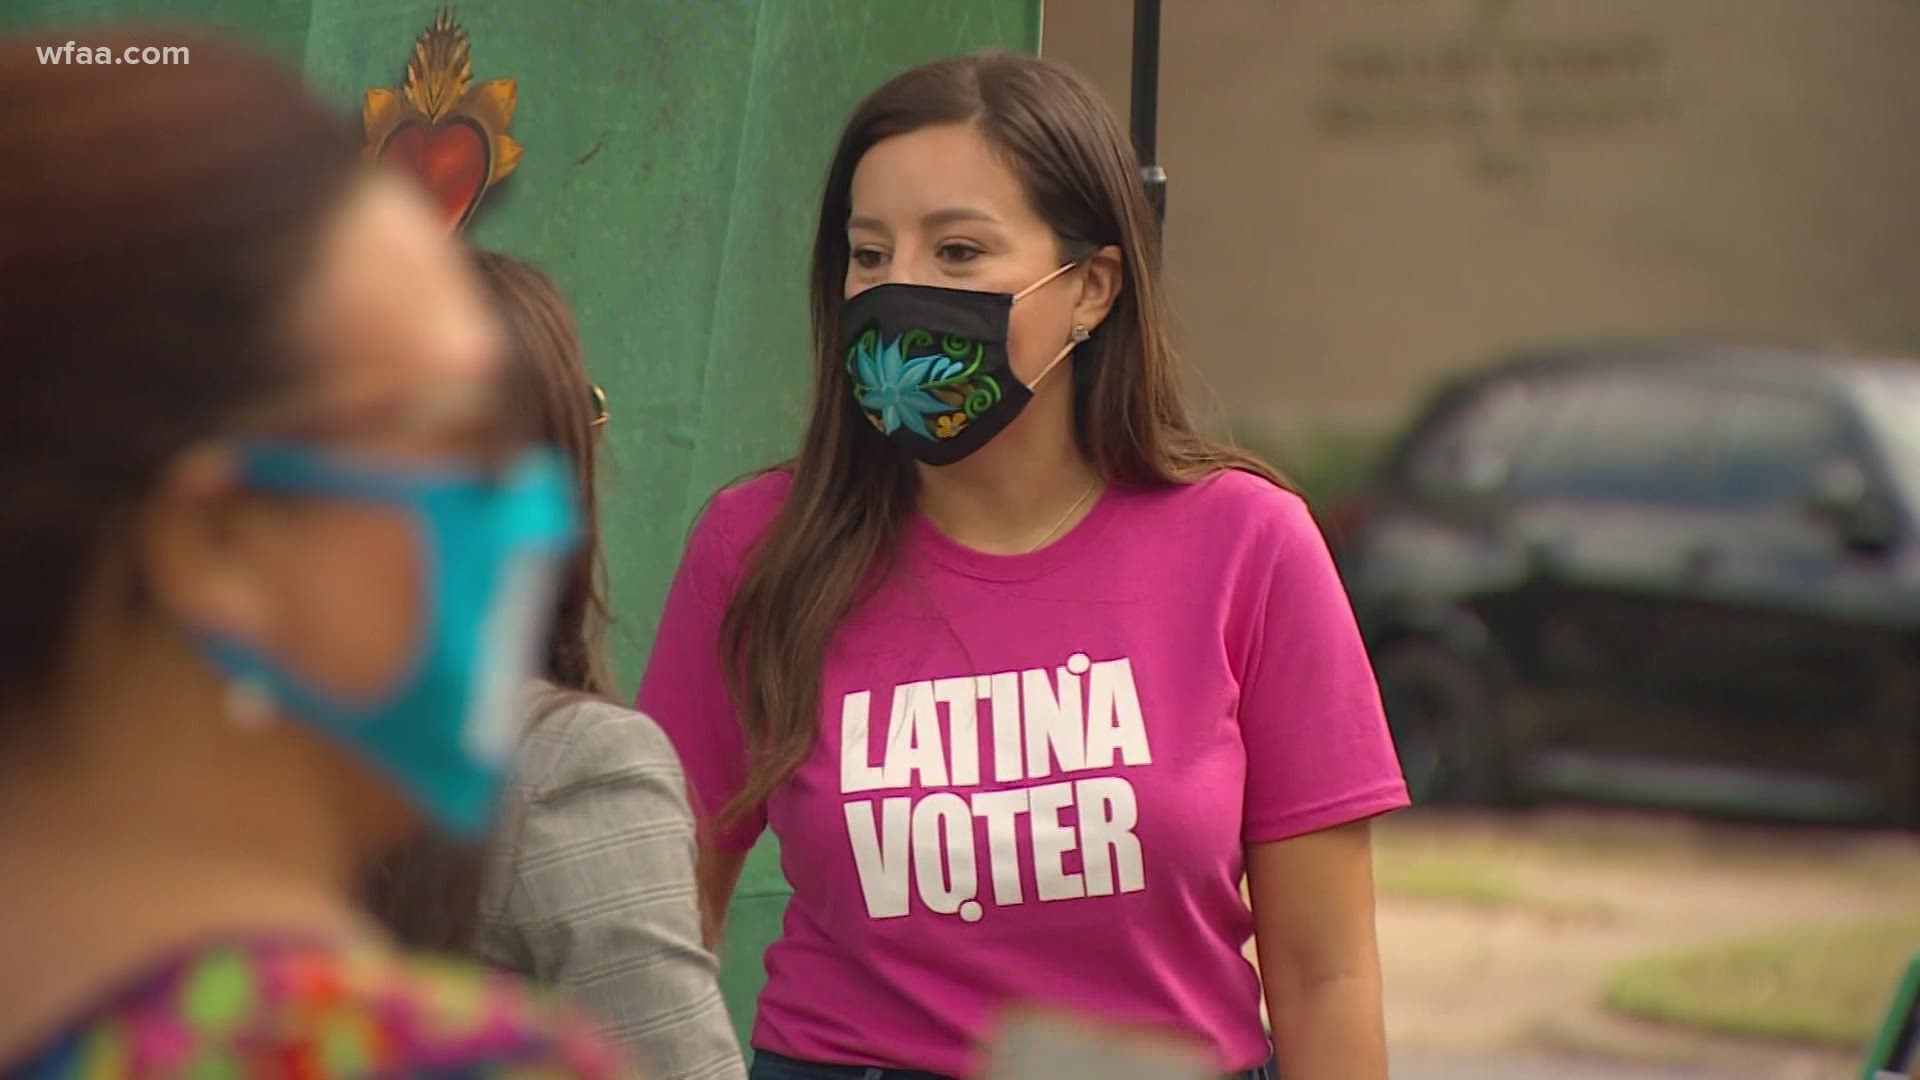 A group of influential women are motivating more Latinas to get to the polls.